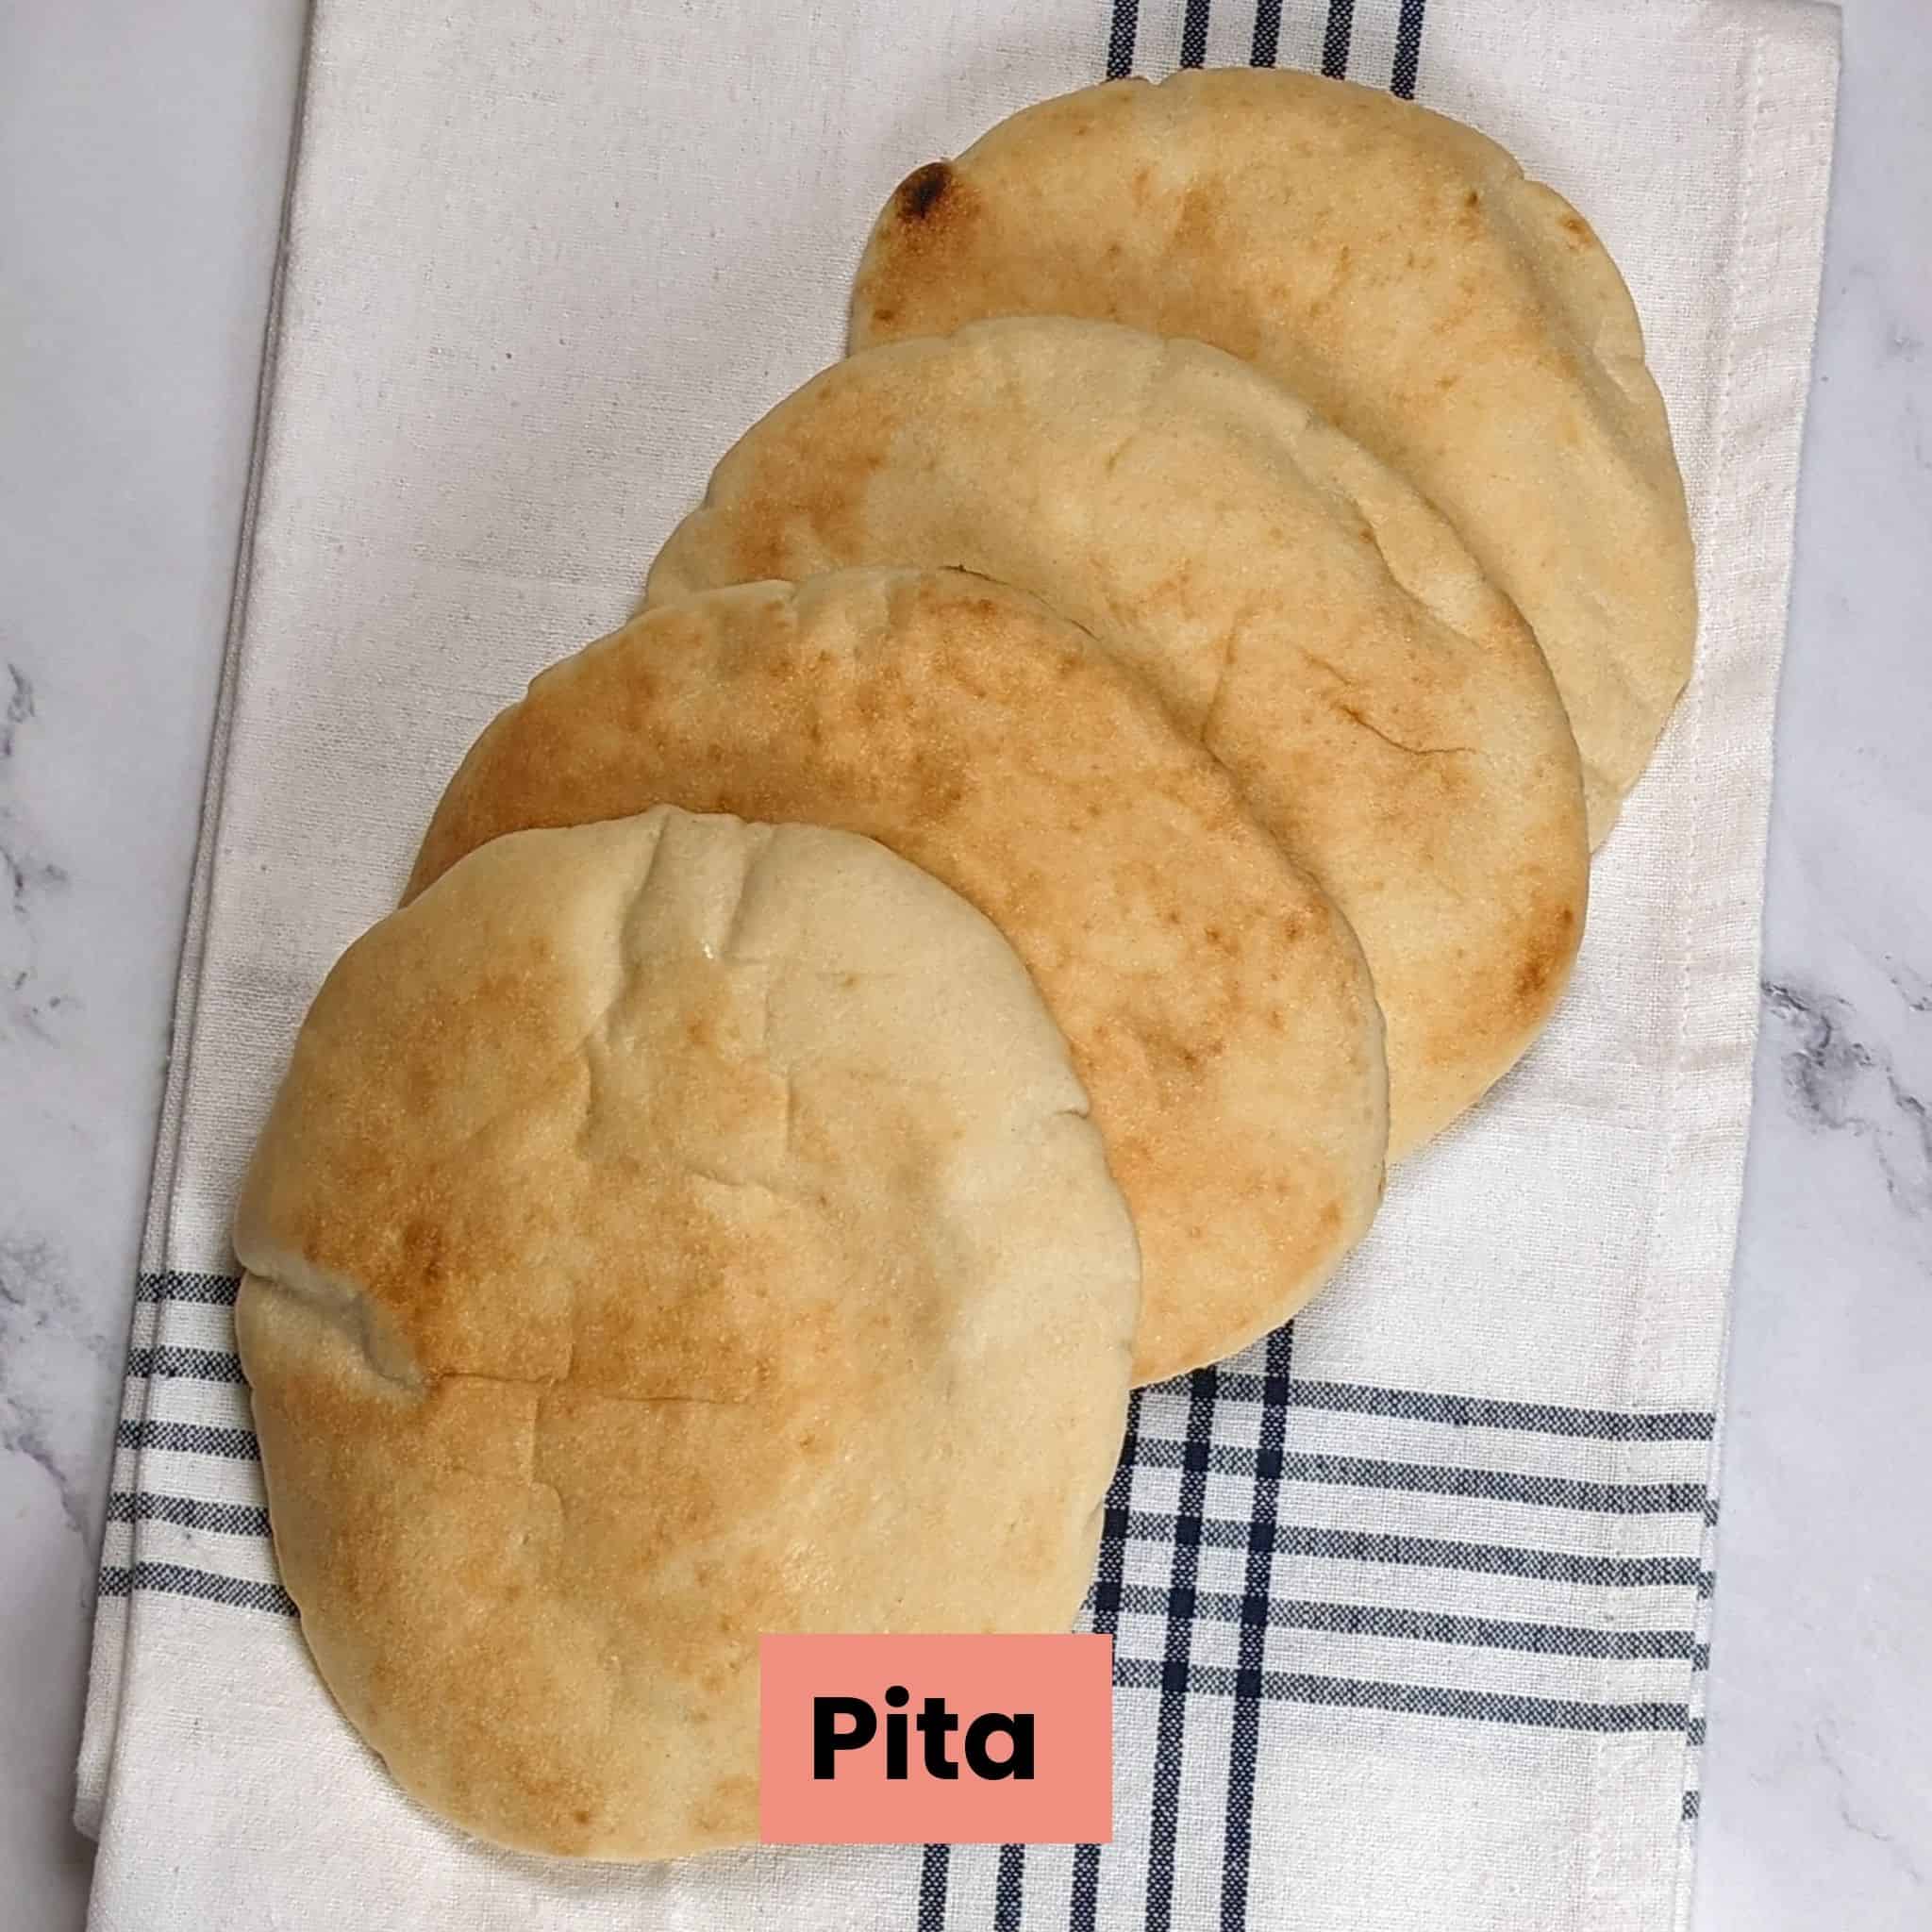 pitas cascading on top of a kitchen towel.